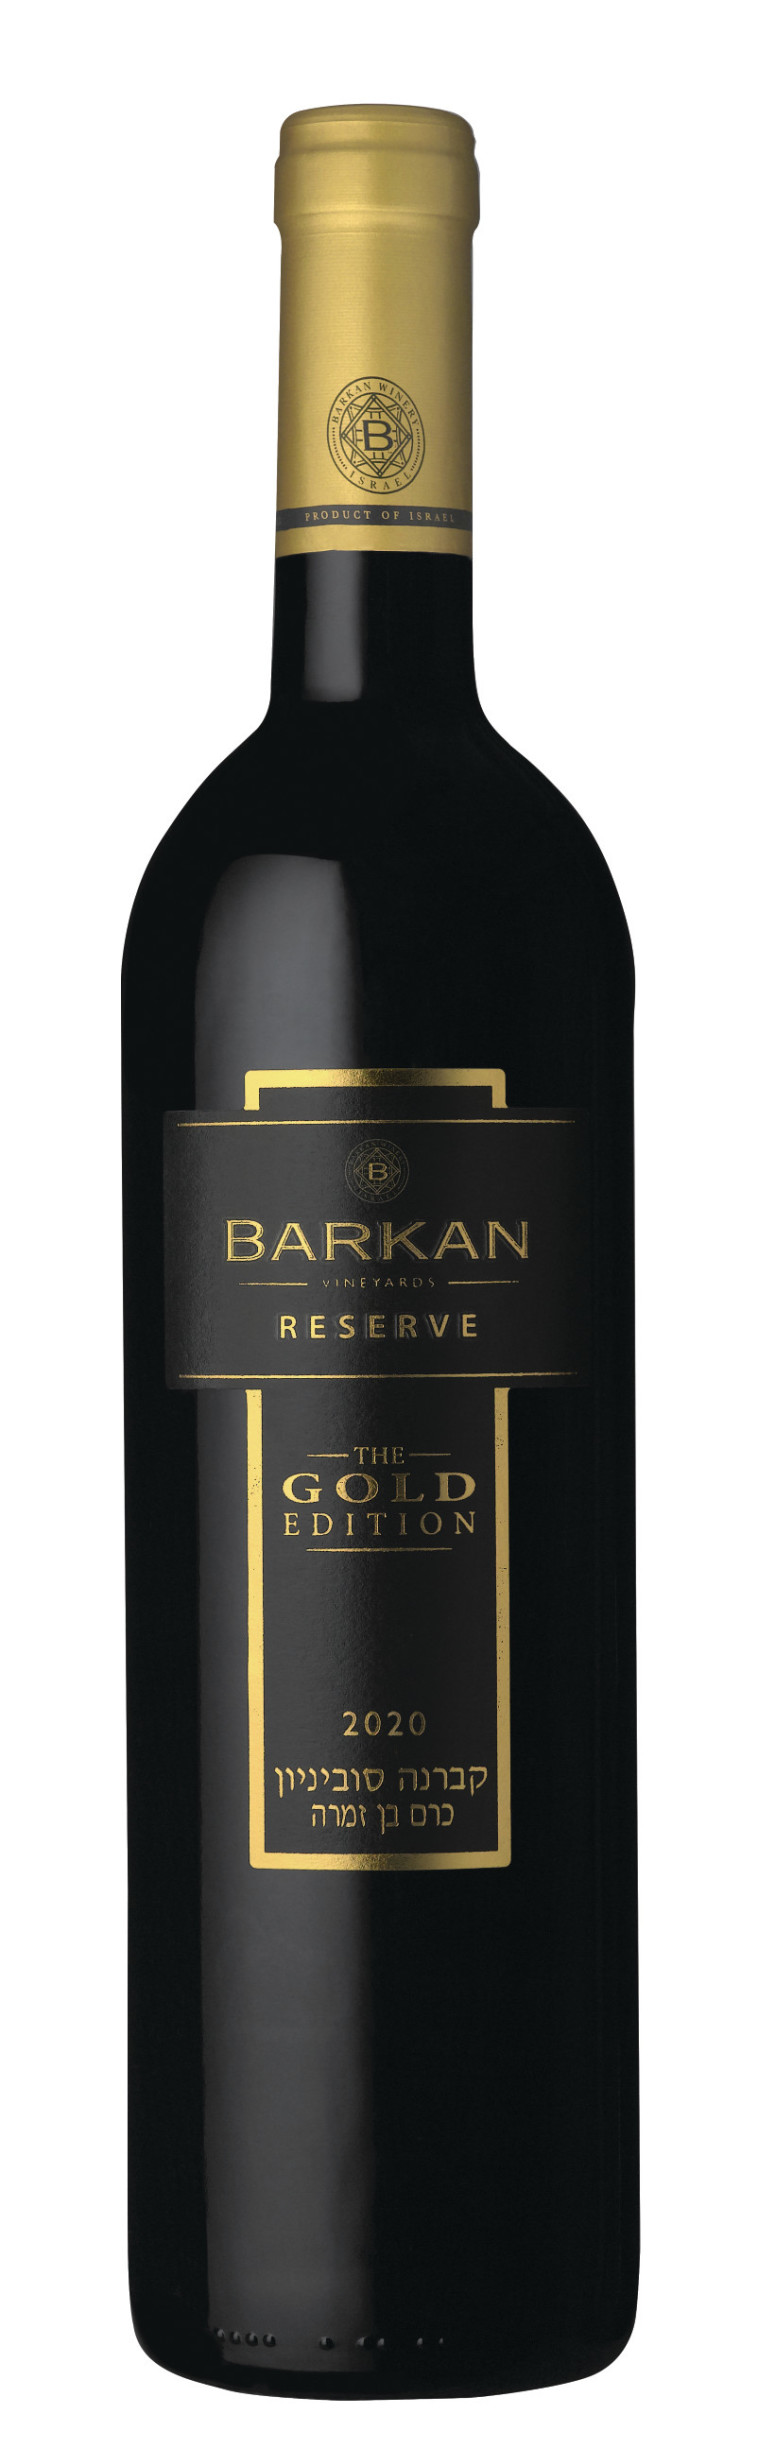 Barkan Winery, Gold Cabernet in the 2020 vintage (Photo: Yachats)